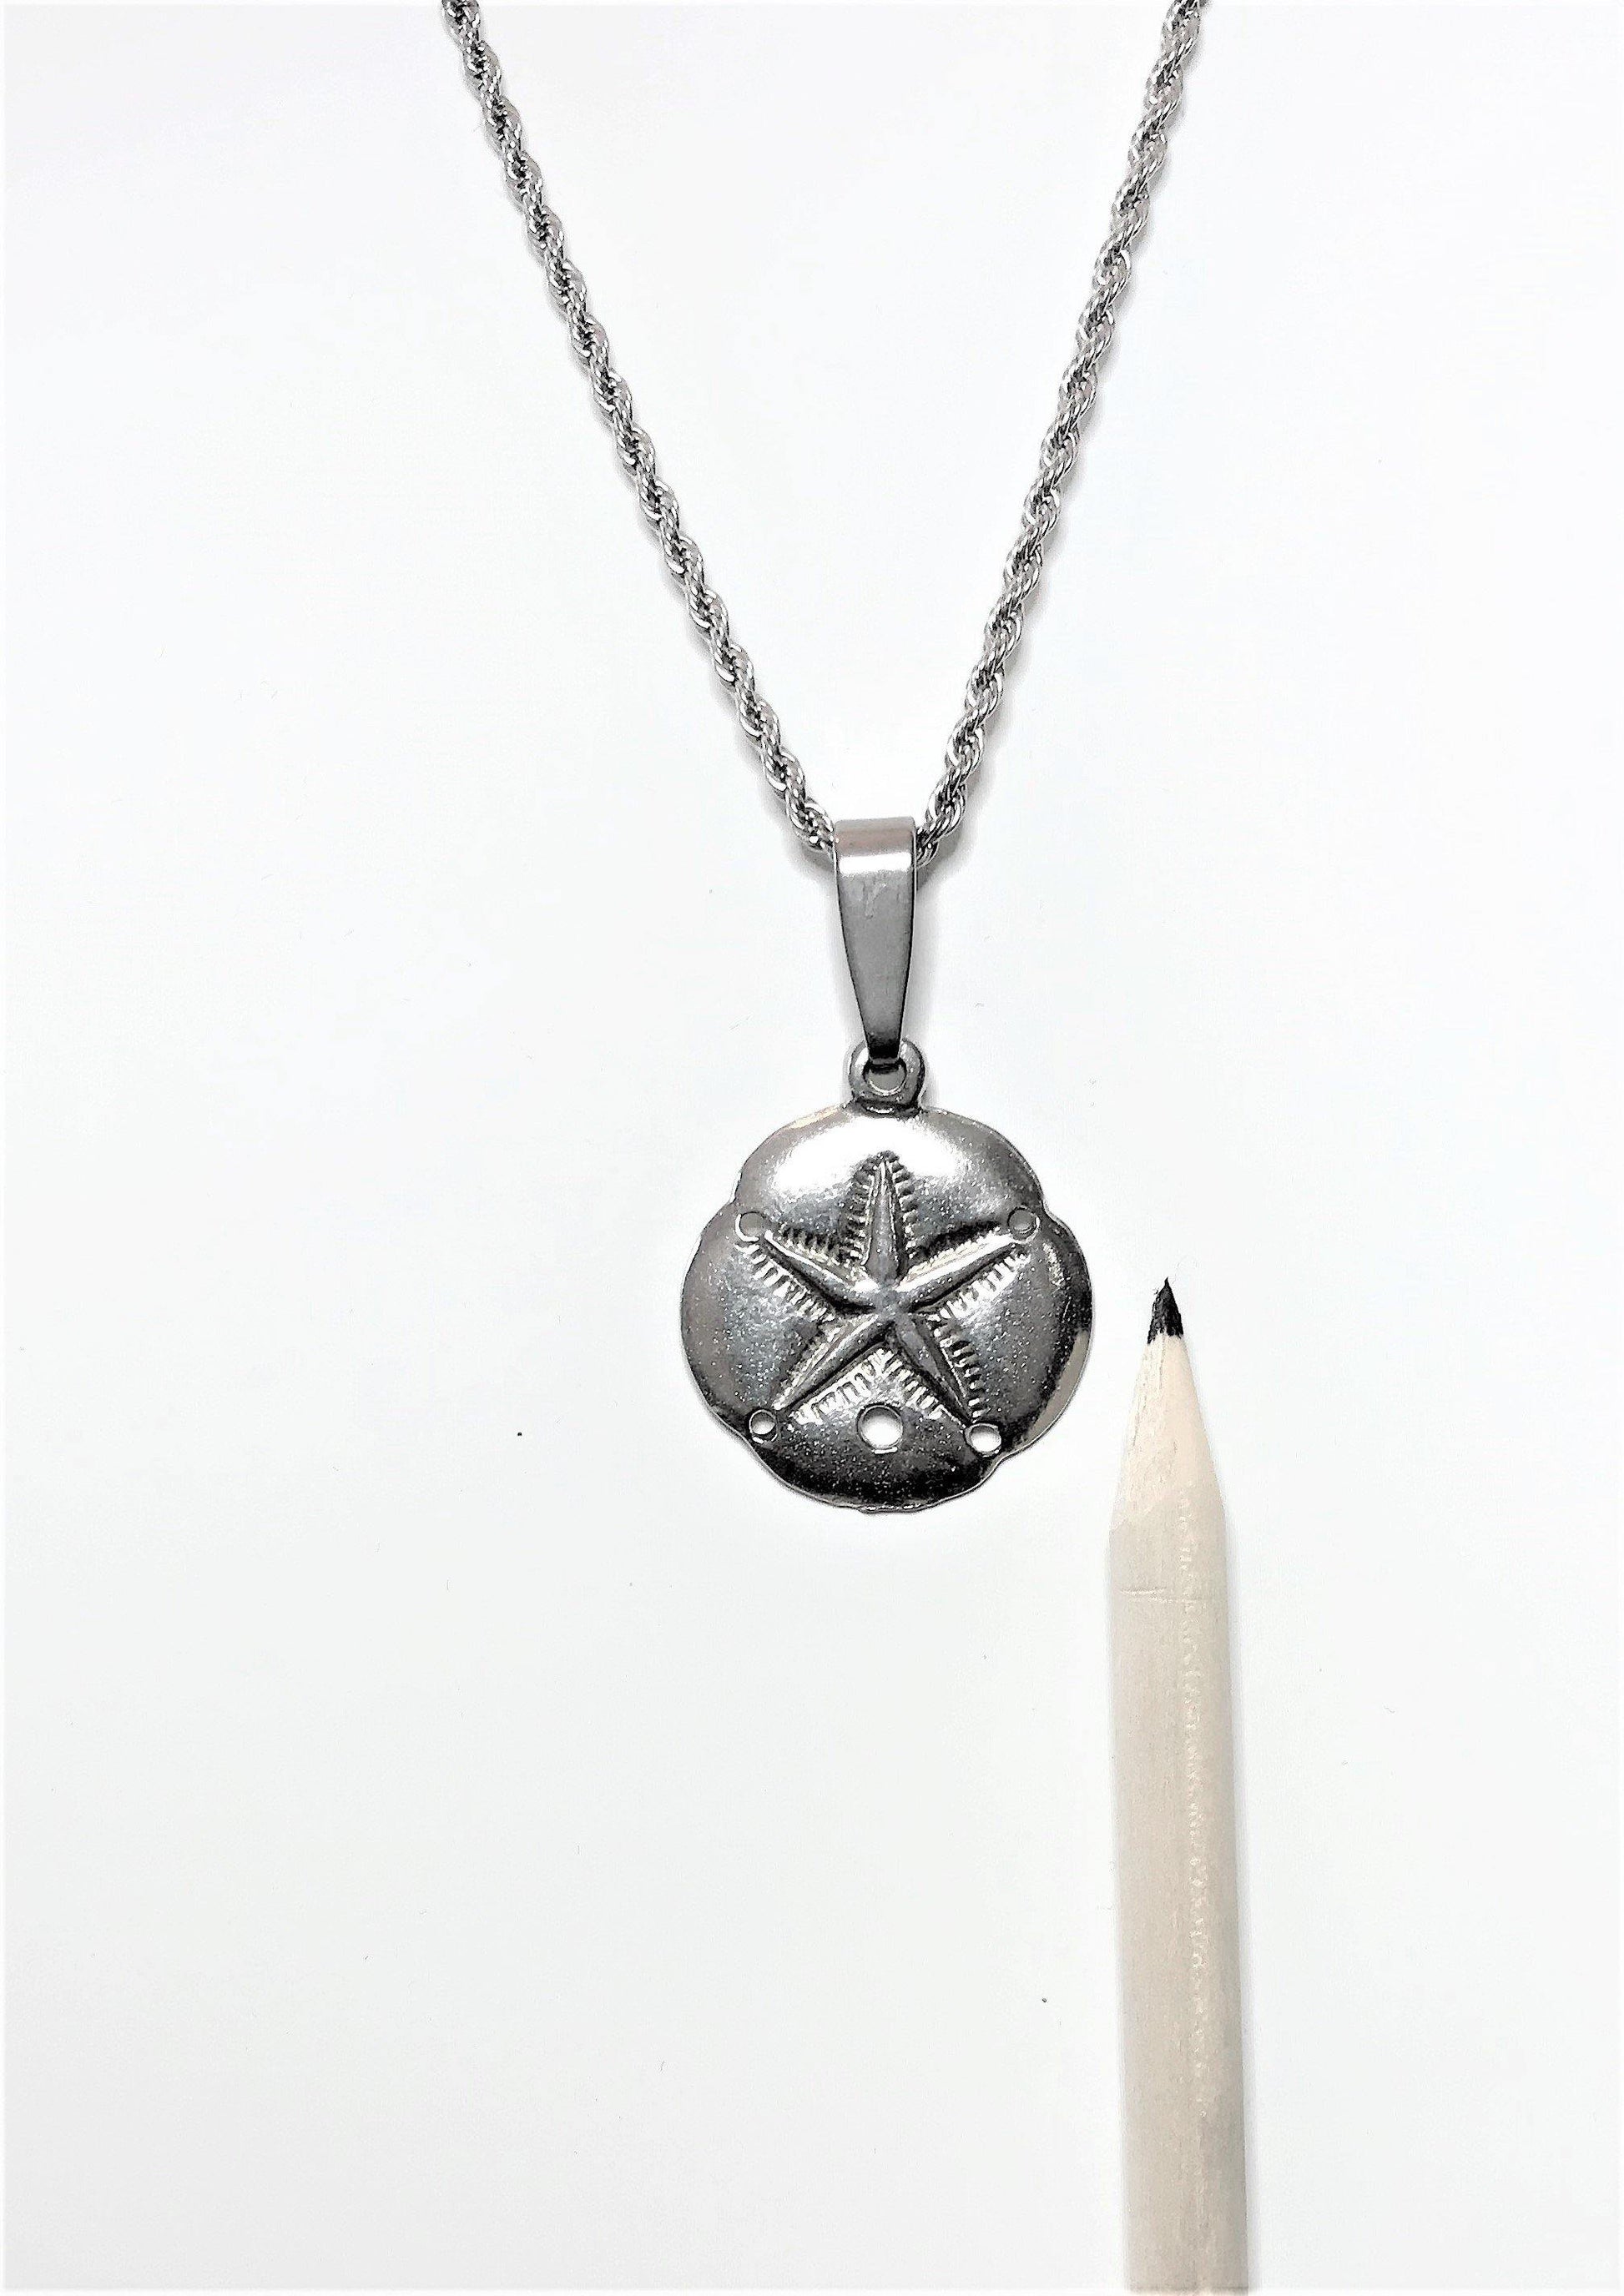 Sand Dollar Pendant Charm Necklace - House of Morgan Pewter